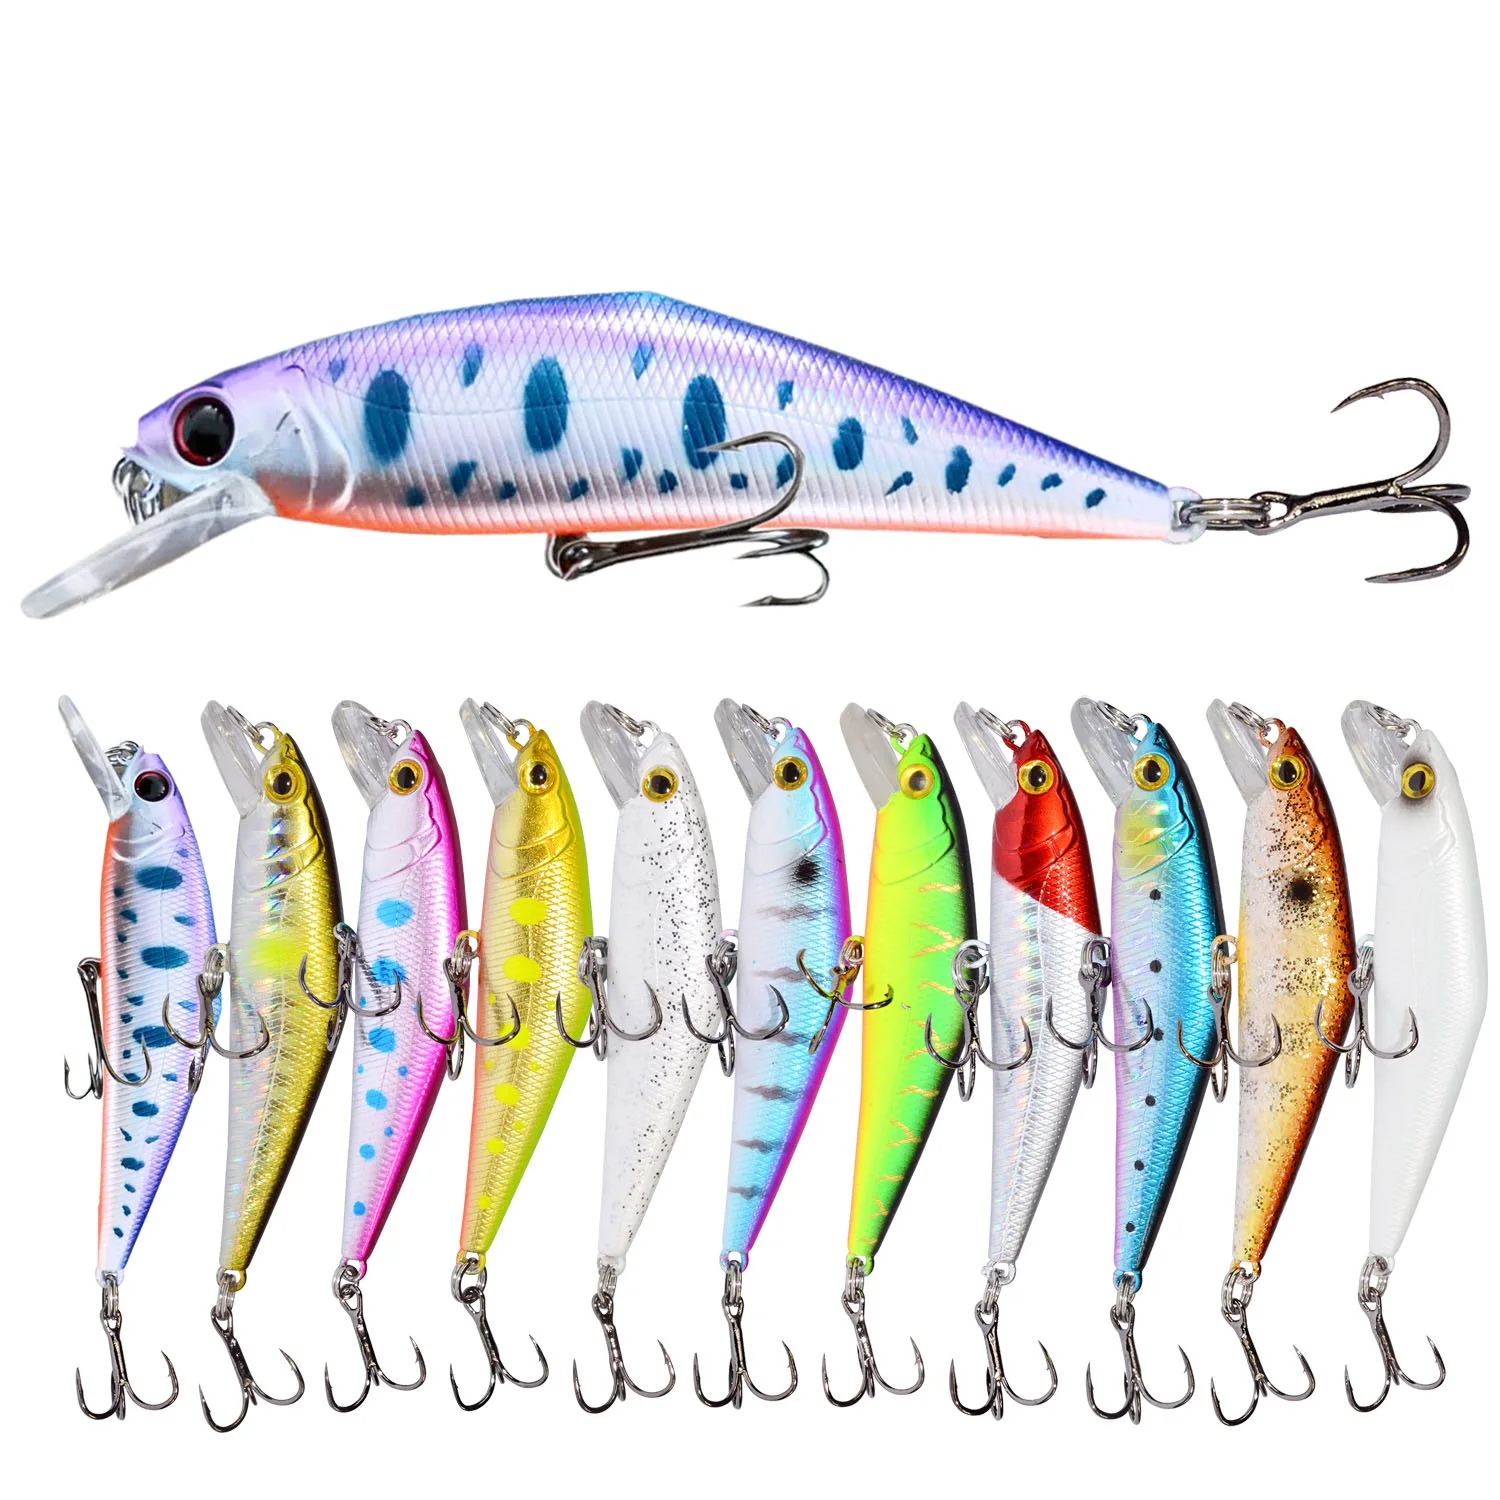 

Trout Fishing Bait 85mm 15g Hard Minnow Baits Mixed Colors Treble Hooks Fishing Lures Minnow Wobblers, 11colors